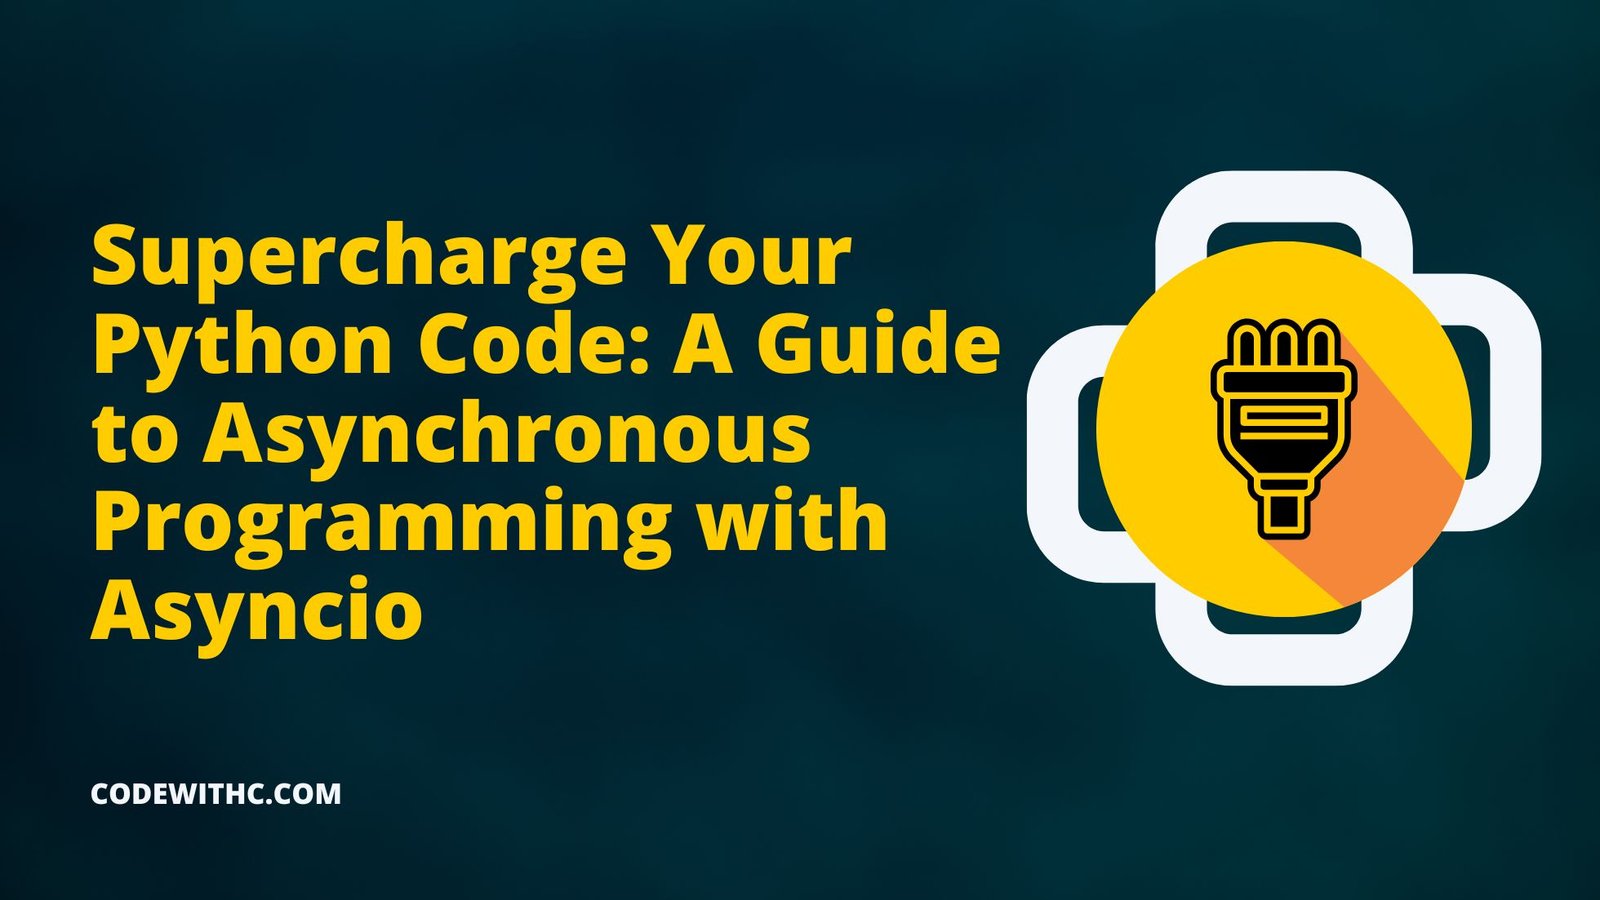 Supercharge Your Python Code: A Guide to Asynchronous Programming with Asyncio